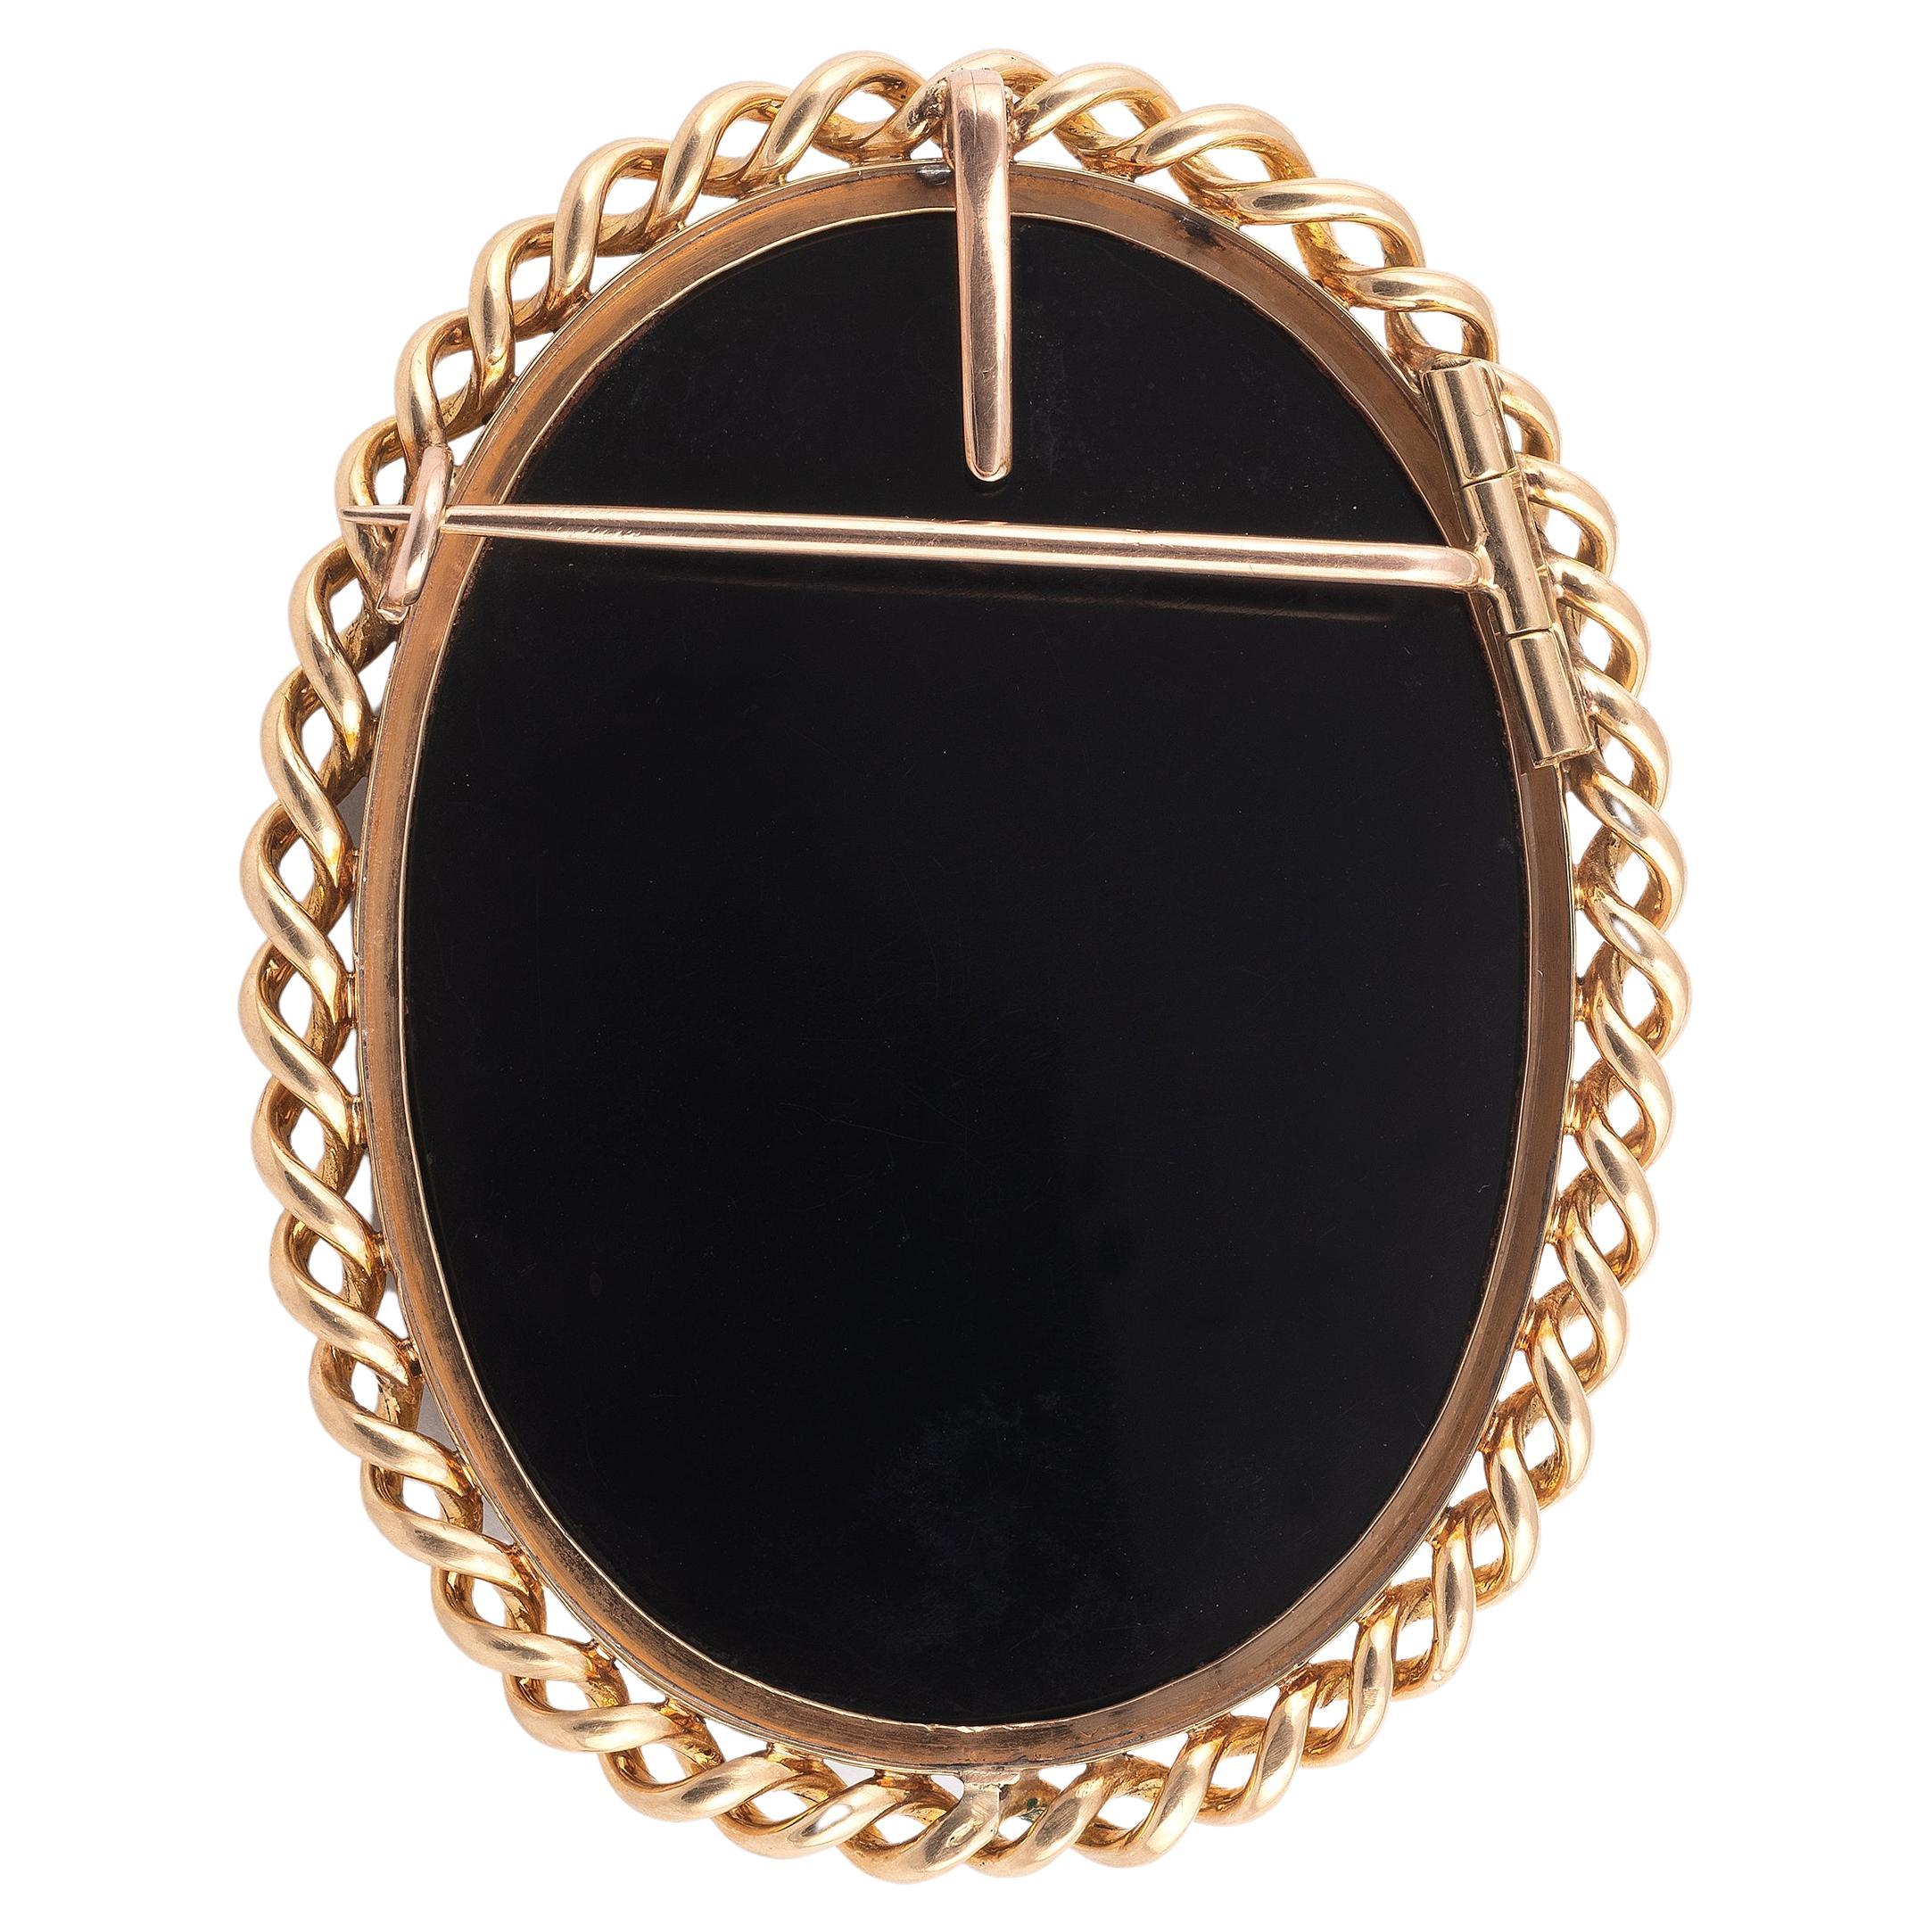 Oval brooch/pendant in 18kt yellow gold, the center decorated with an onyx cameo depicting a Venus bust in profile wearing emerald and diamond highlight jewellery. 19th century French work. Height: 6.3 cm - Gross weight: 49.8 g